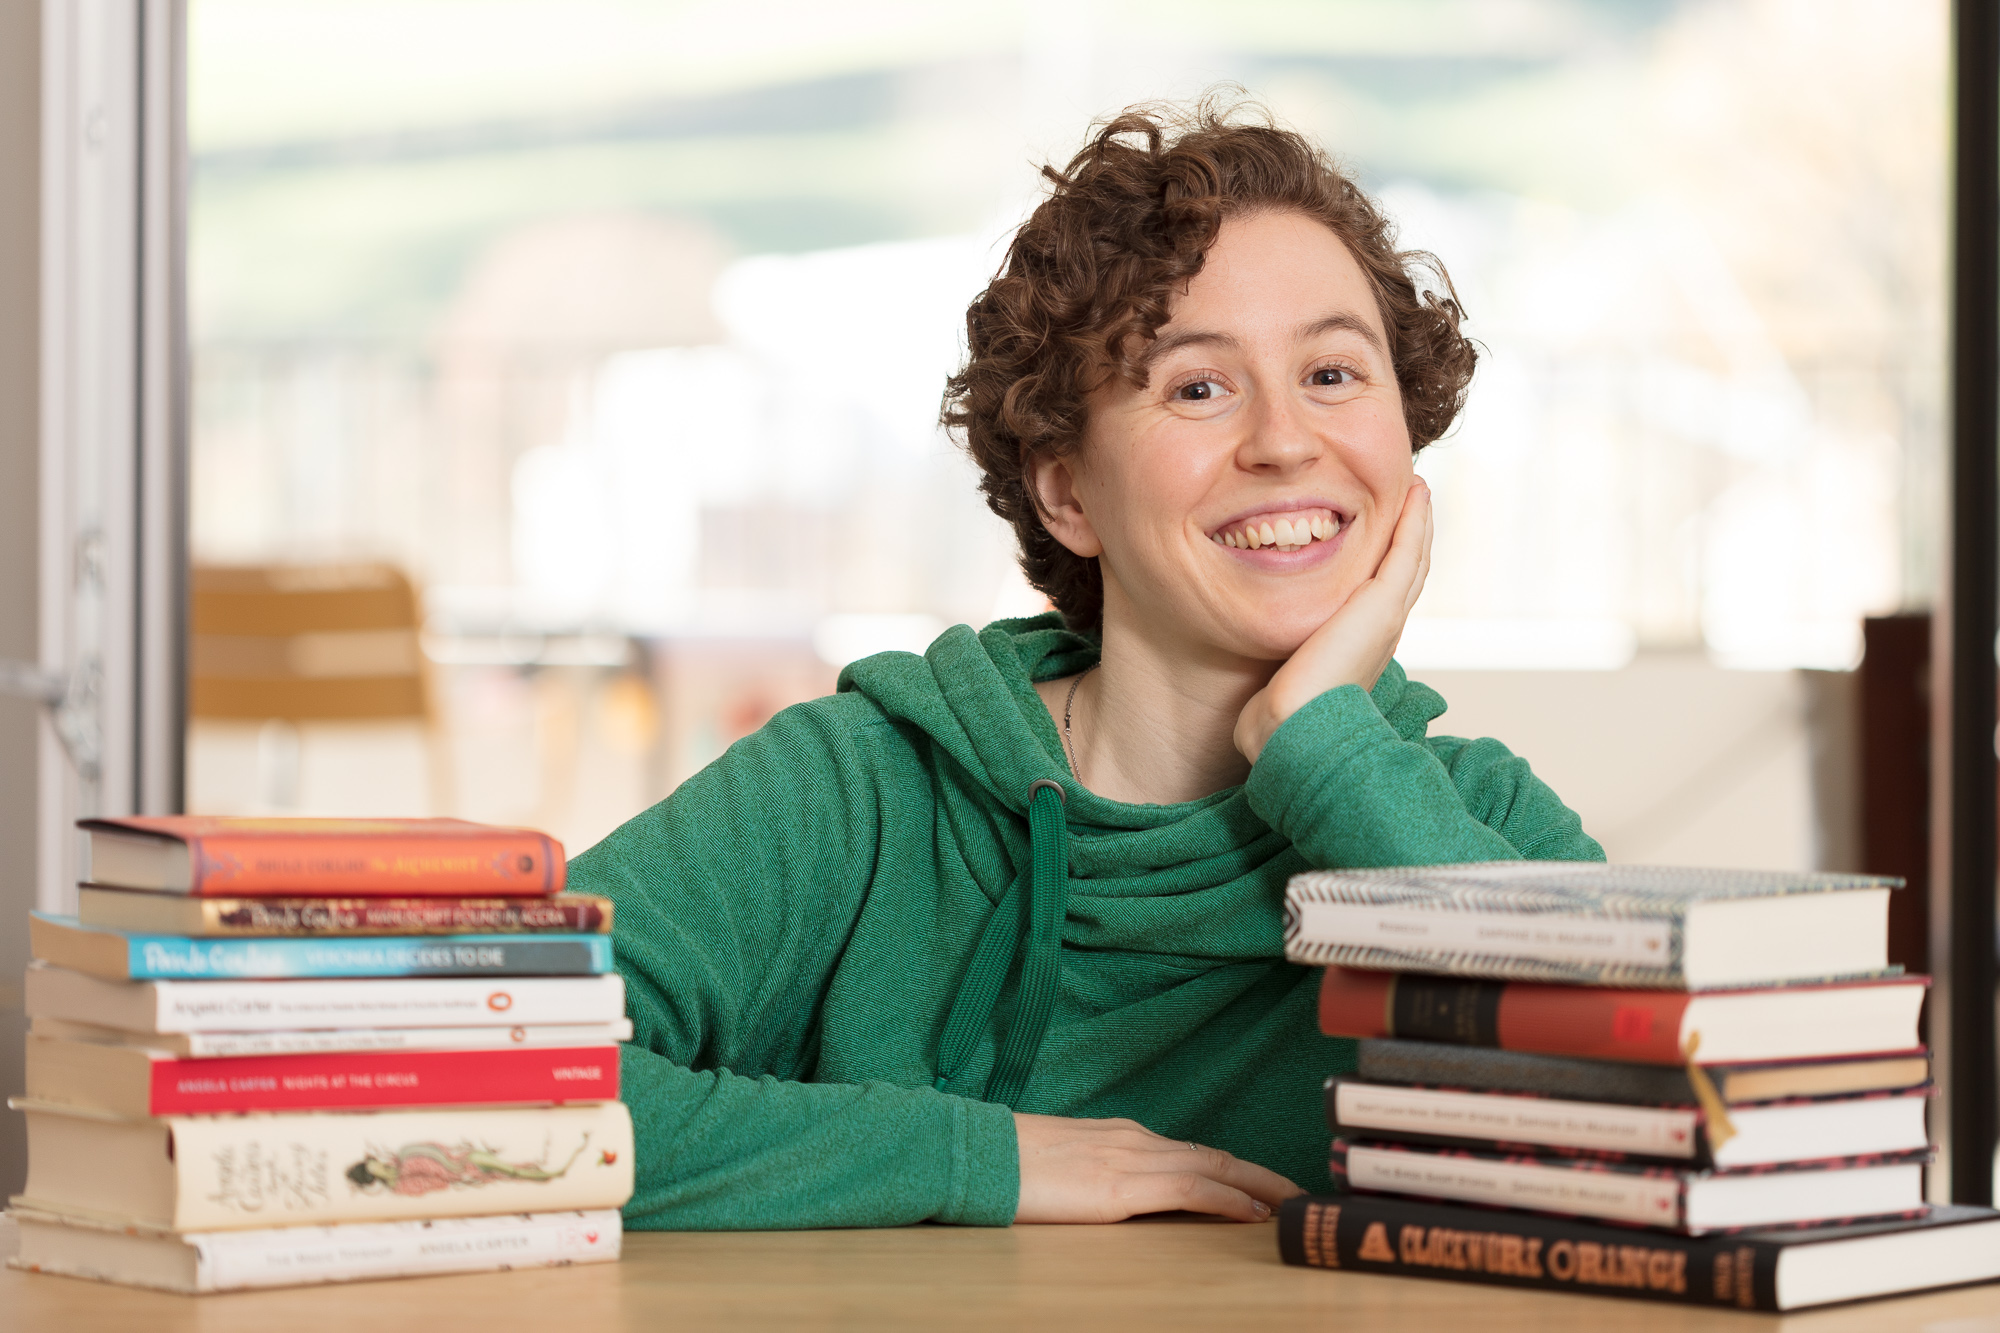 The author, a young white woman with short curly hair, posing awkwardly behind 2 small piles of books